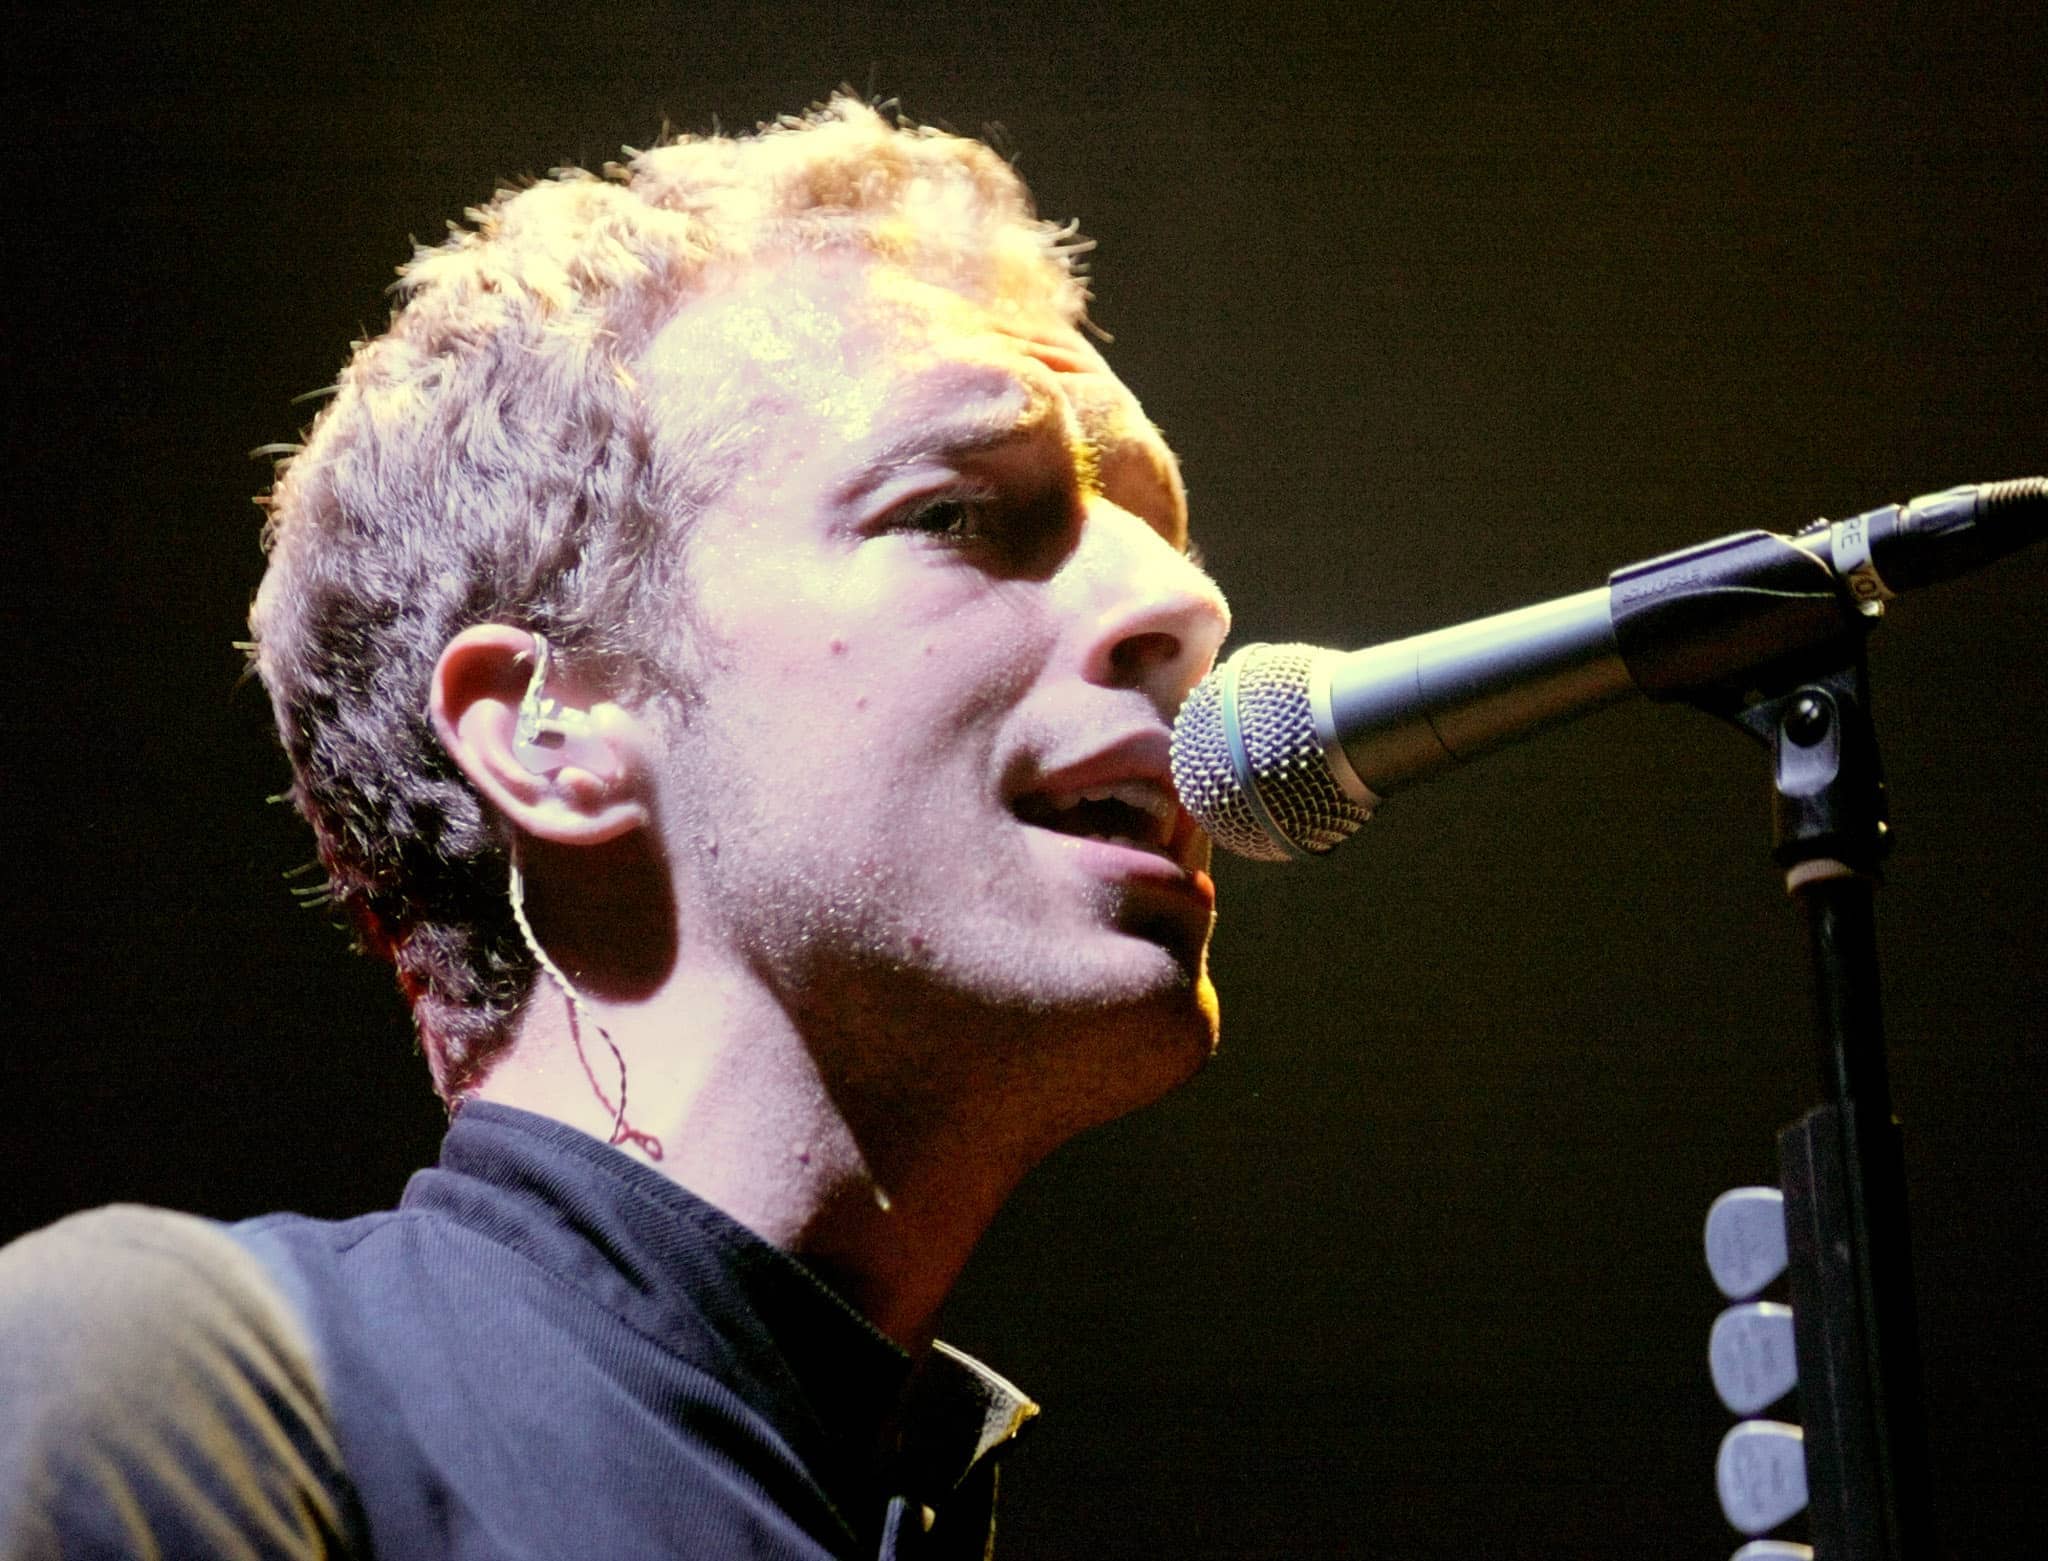 frontman-chris-martin-of-british-rock-band-coldplay-performs-during-a-sold-out-show-at-the-joint-i